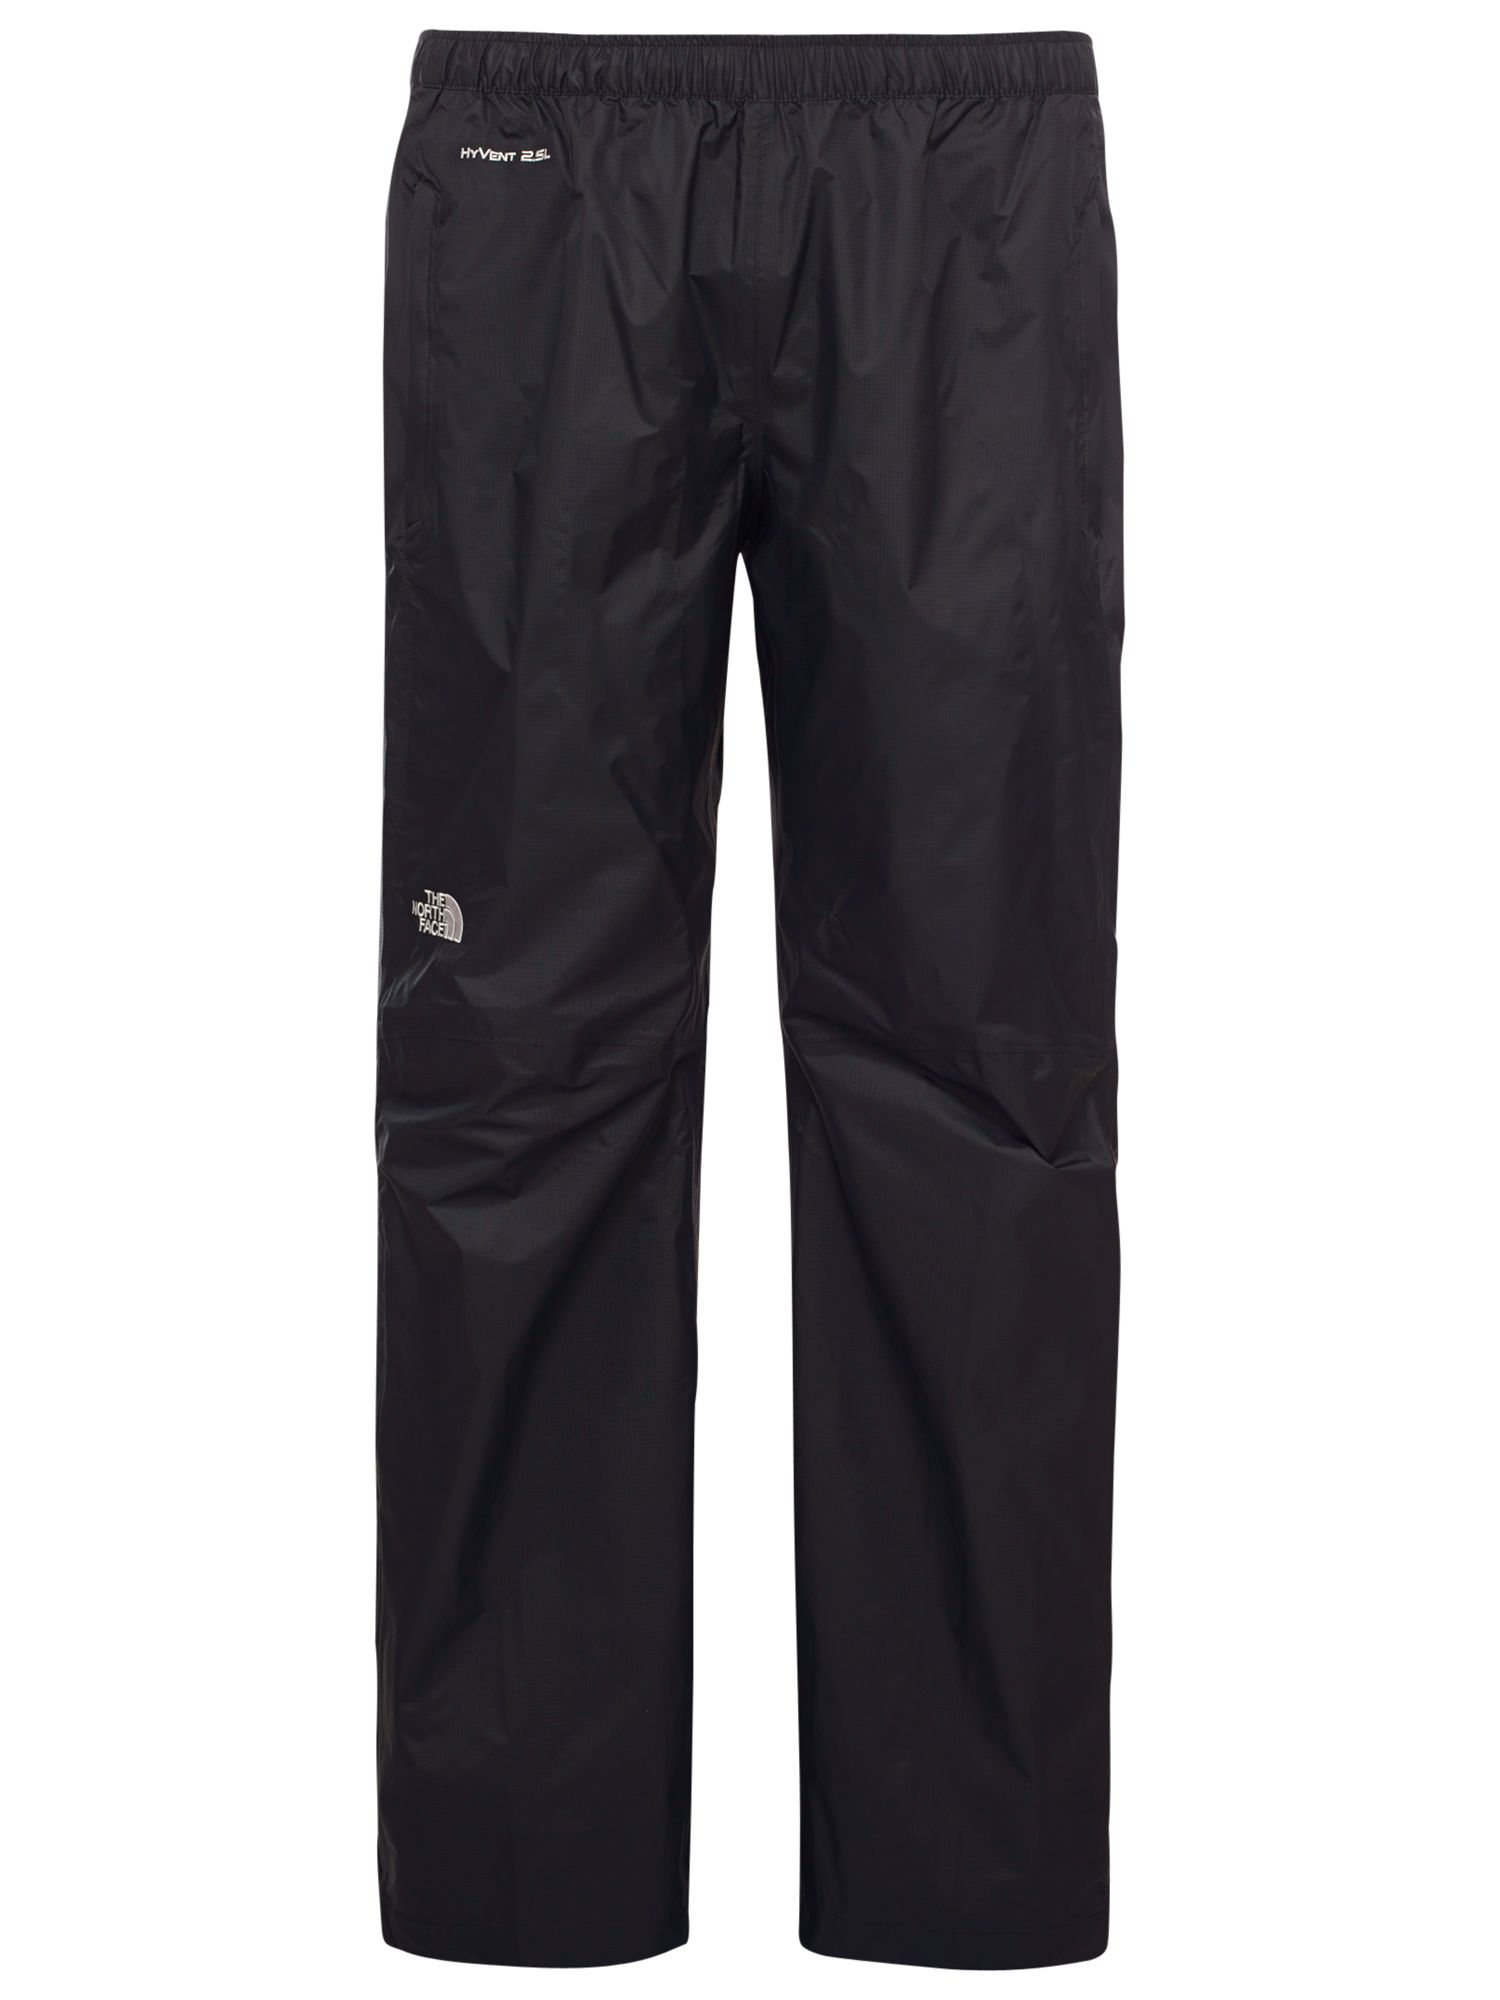 north face trousers mens sale